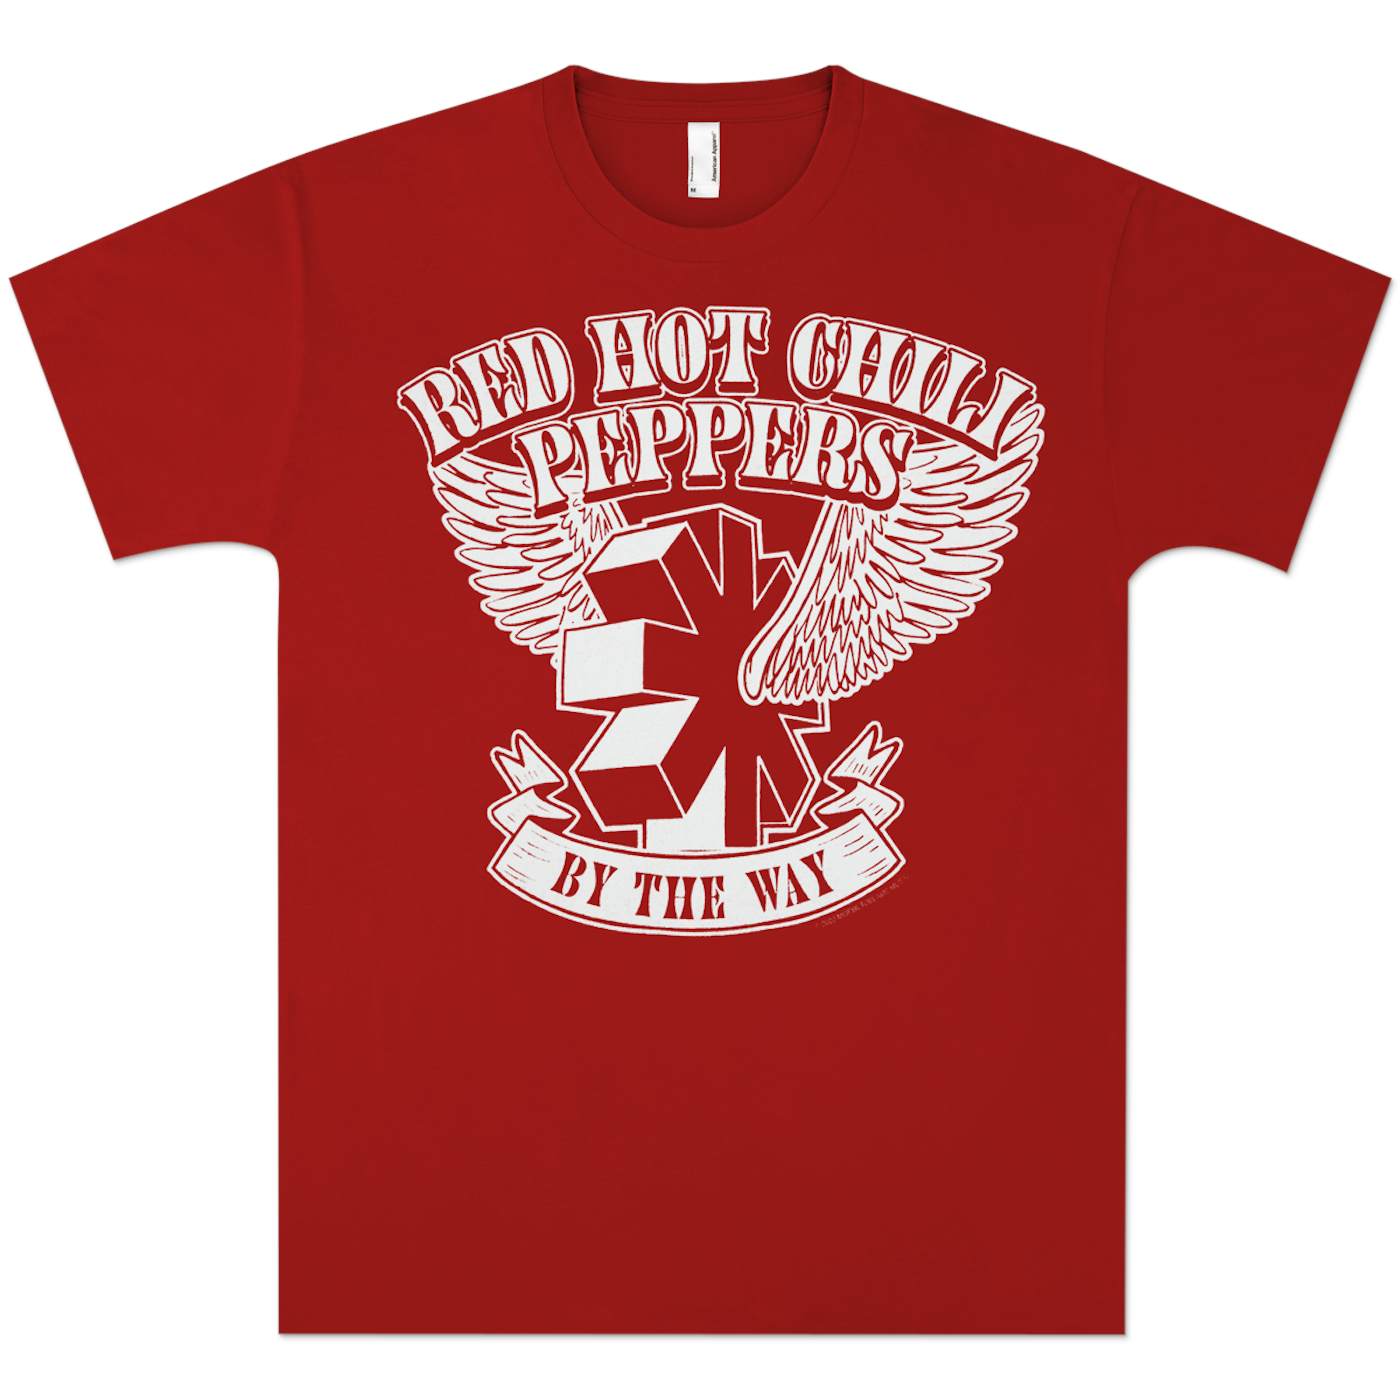 Red Hot Chili Peppers Flyin By the Way T-Shirt